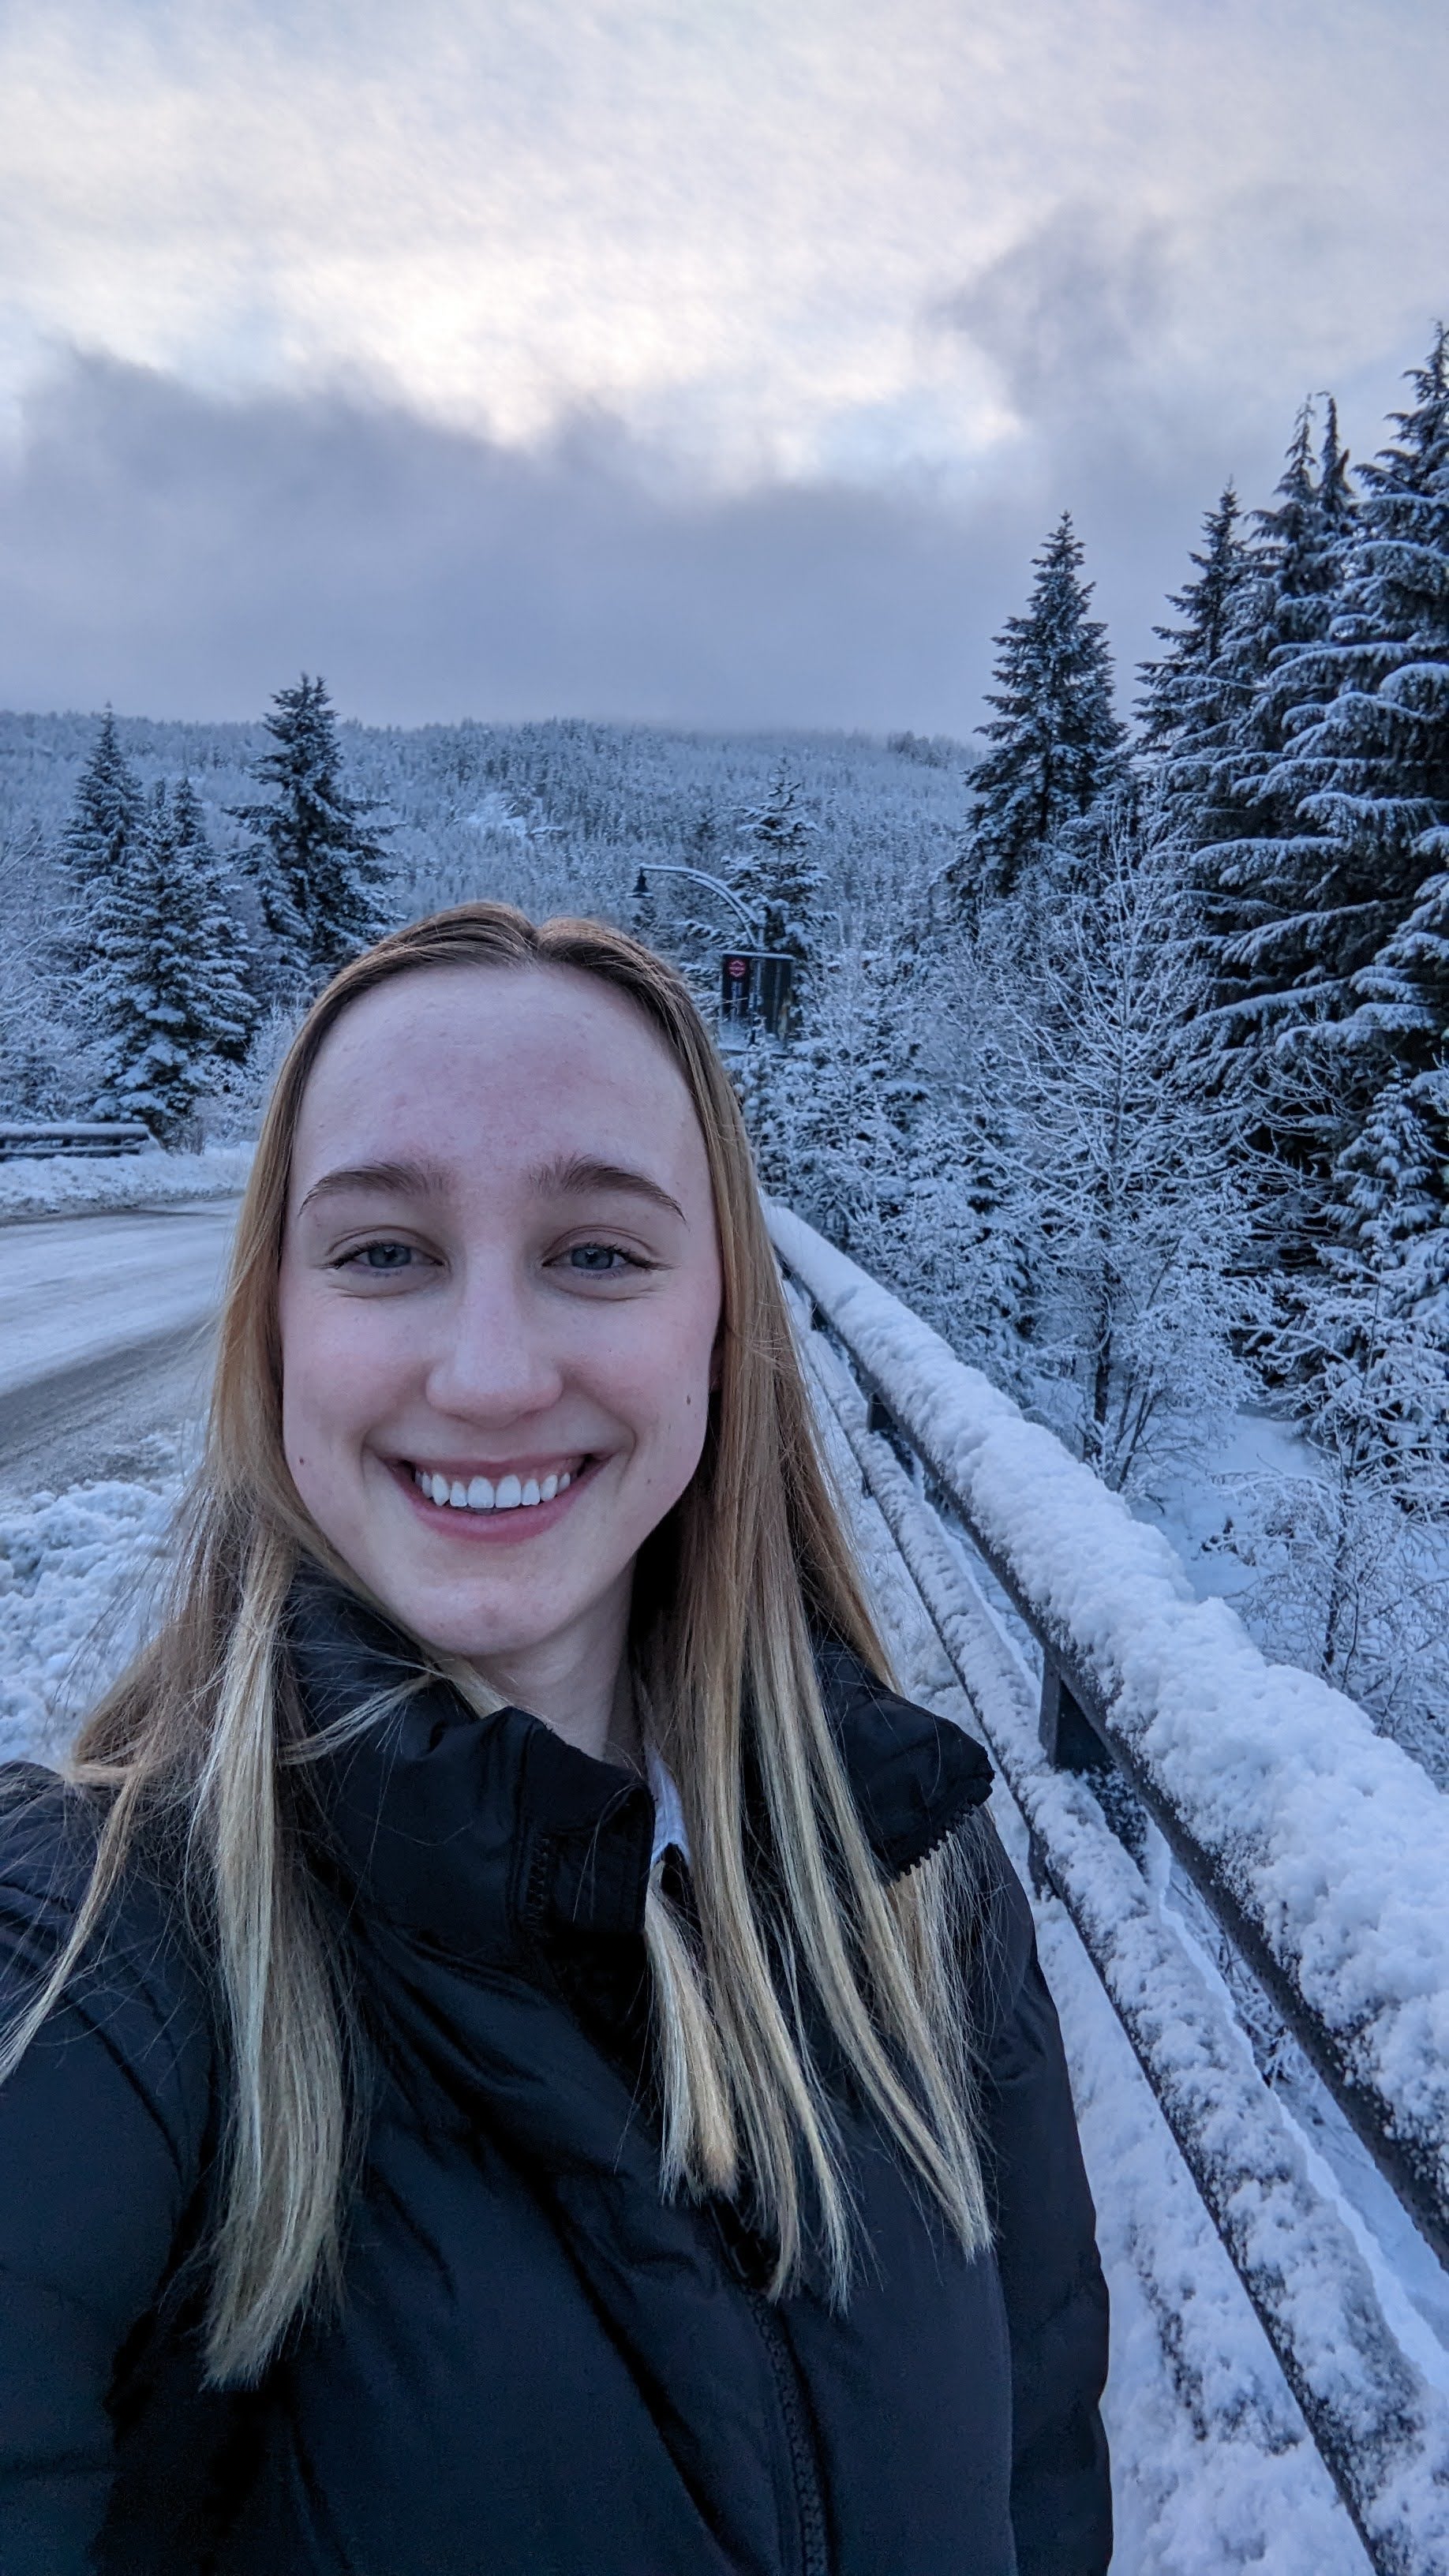 Sarah Hardy has blonde hair and blue eyes. She is wearing a black winter coat and is standing on a snow covered bridge.